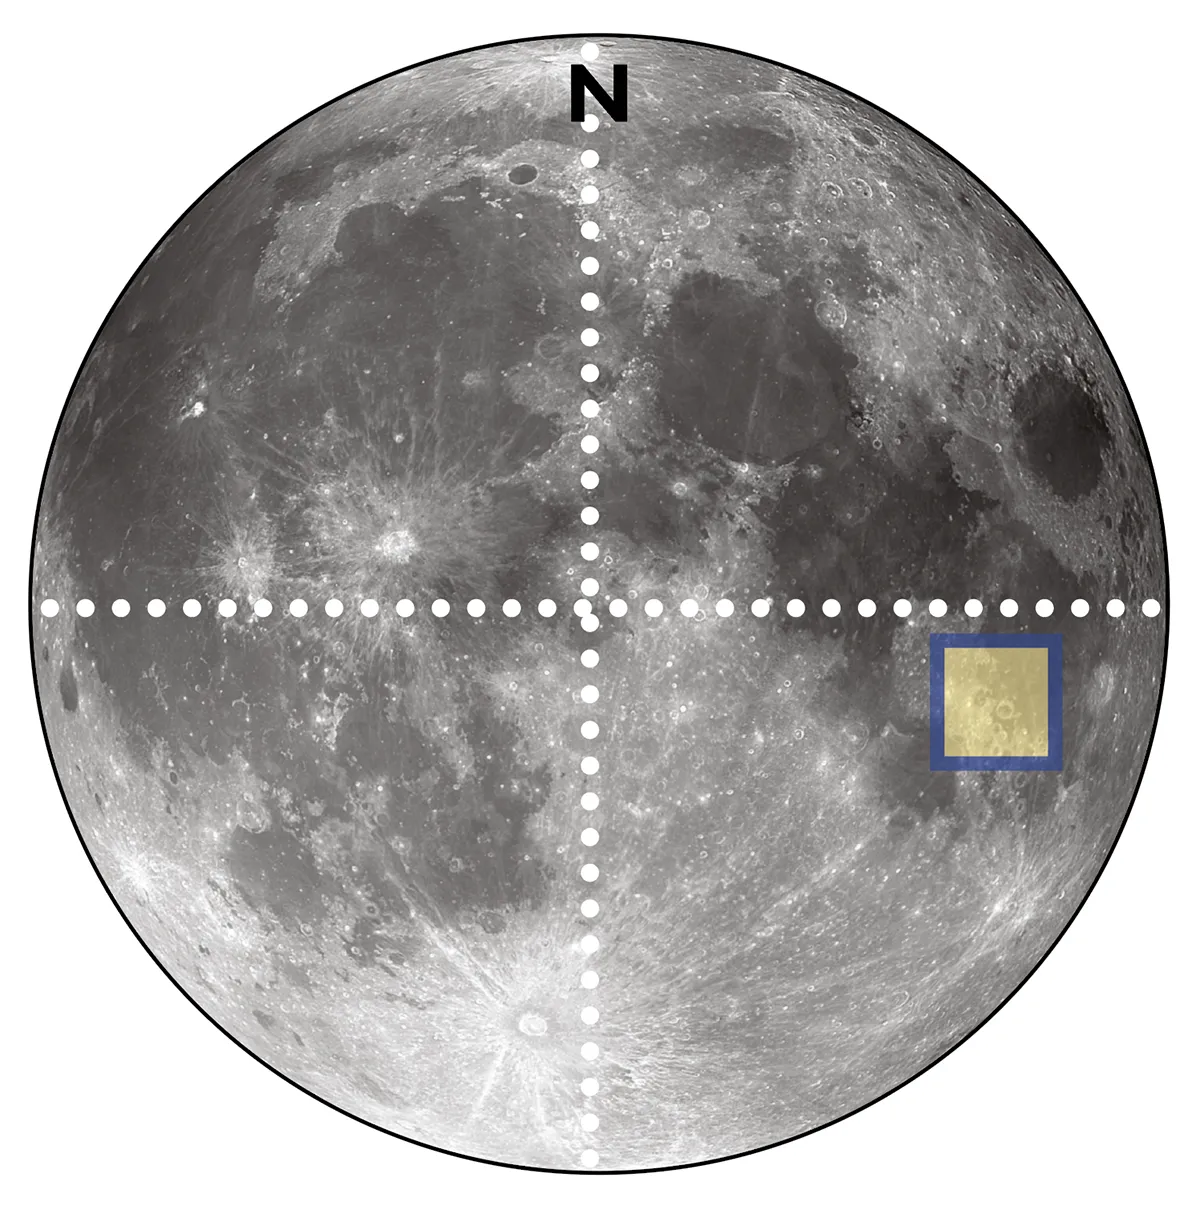 Illustration showing the location of Crater Gutenberg on the Moon